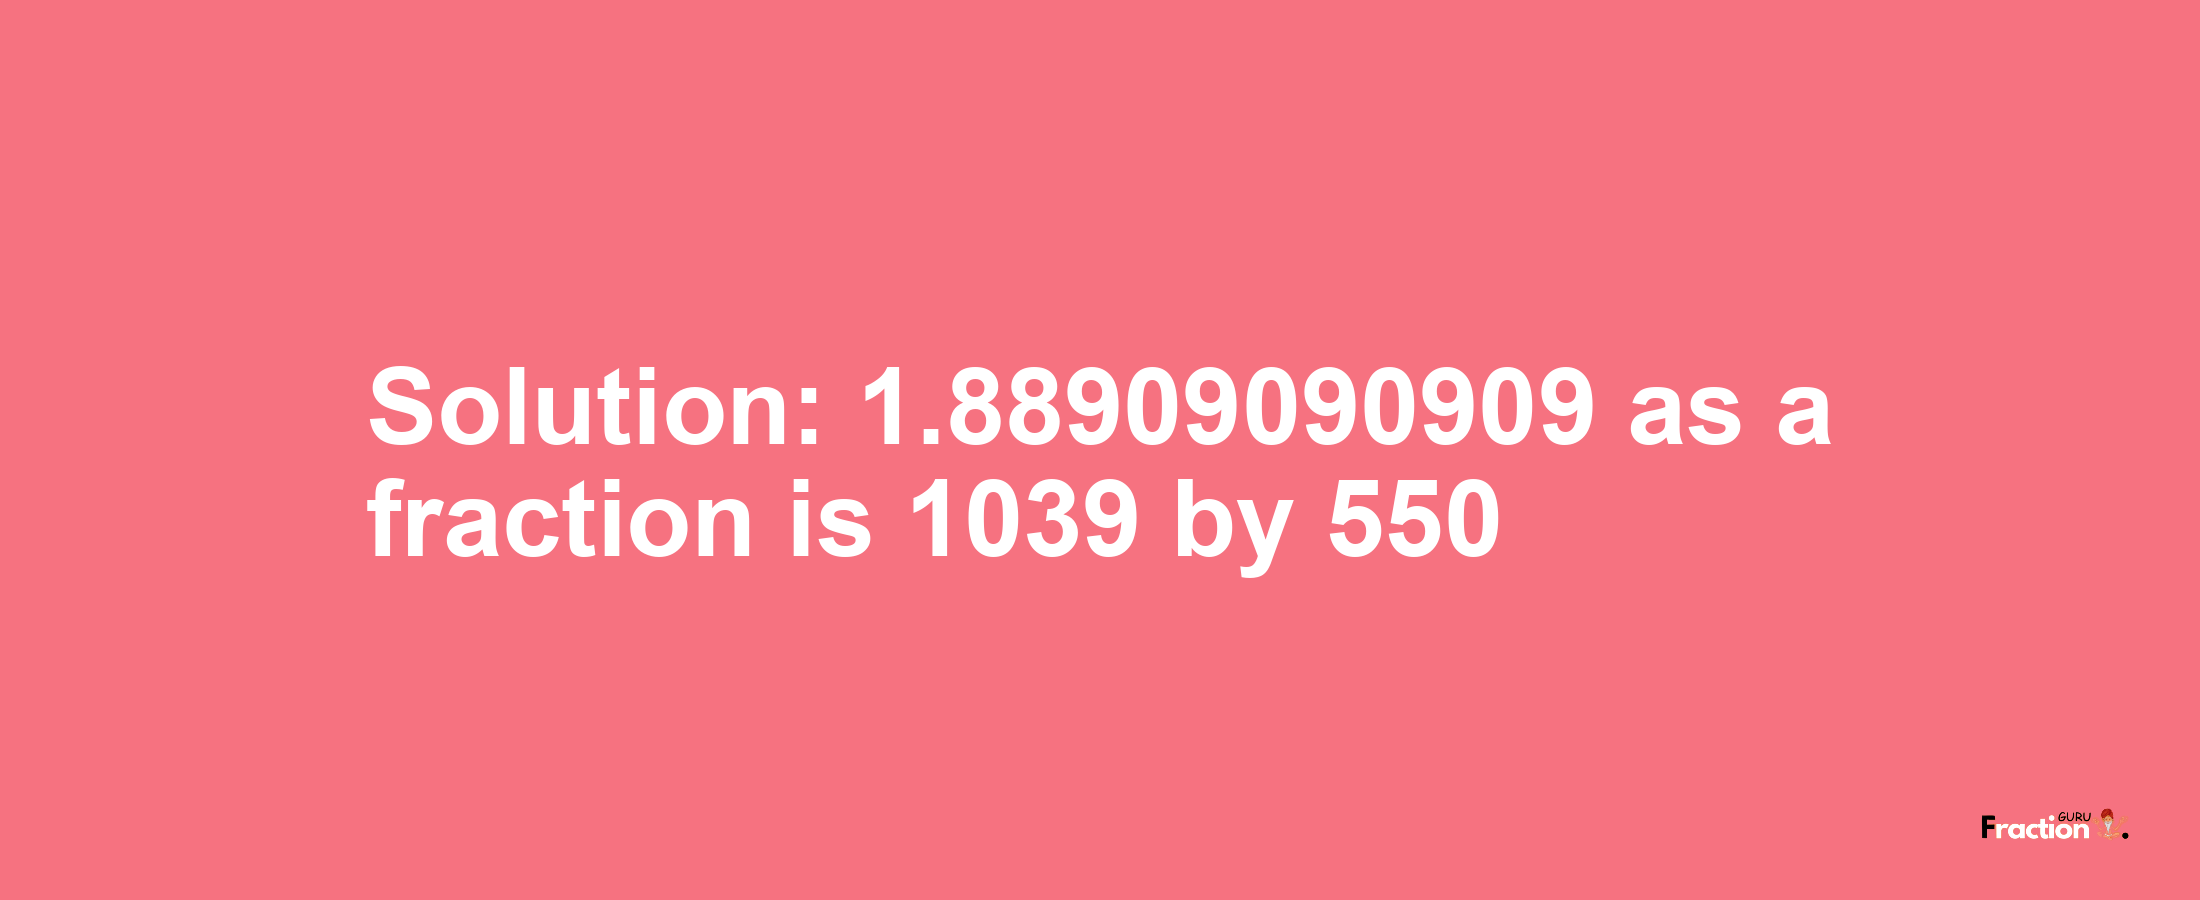 Solution:1.88909090909 as a fraction is 1039/550